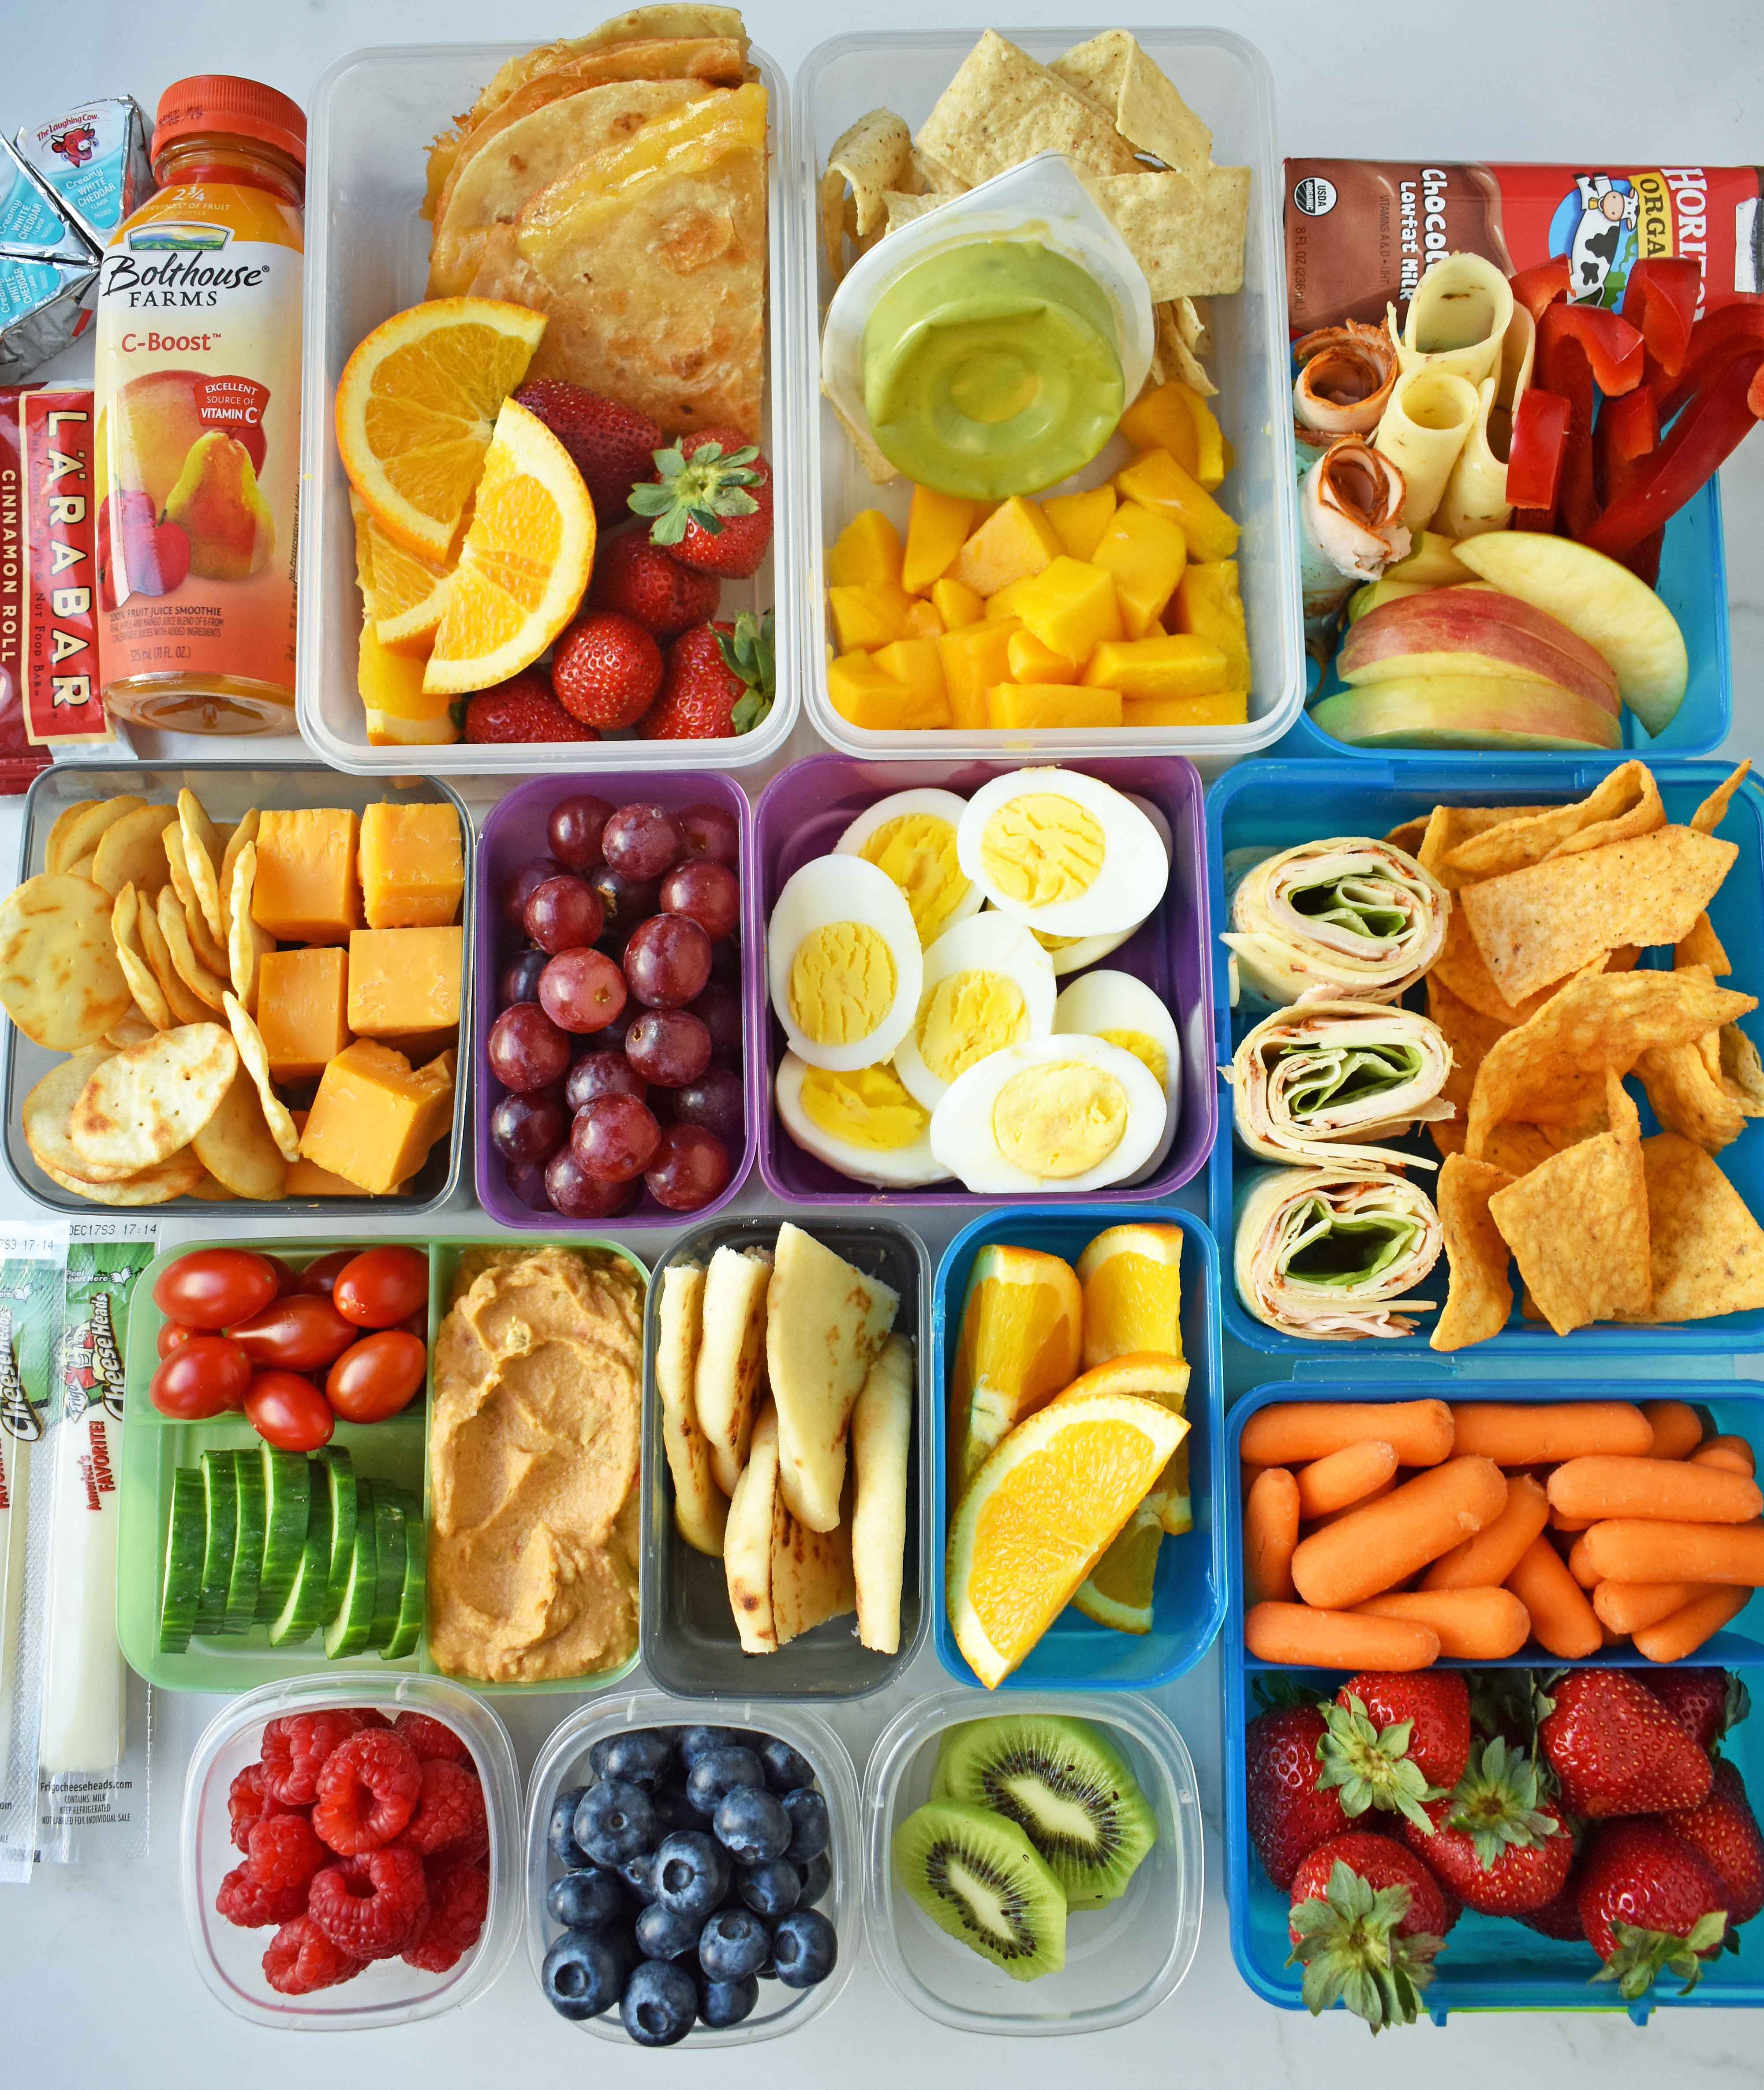 Back to School Kids Lunch Ideas. Healthy kids lunch ideas that includes wraps, roll-ups, sandwiches, quesadillas, gluten-free, meat and cheese kabobs, lunch snack ideas, and fresh fruits and veggies. Healthy lunch ideas by Modern Honey. www.modernhoney.com